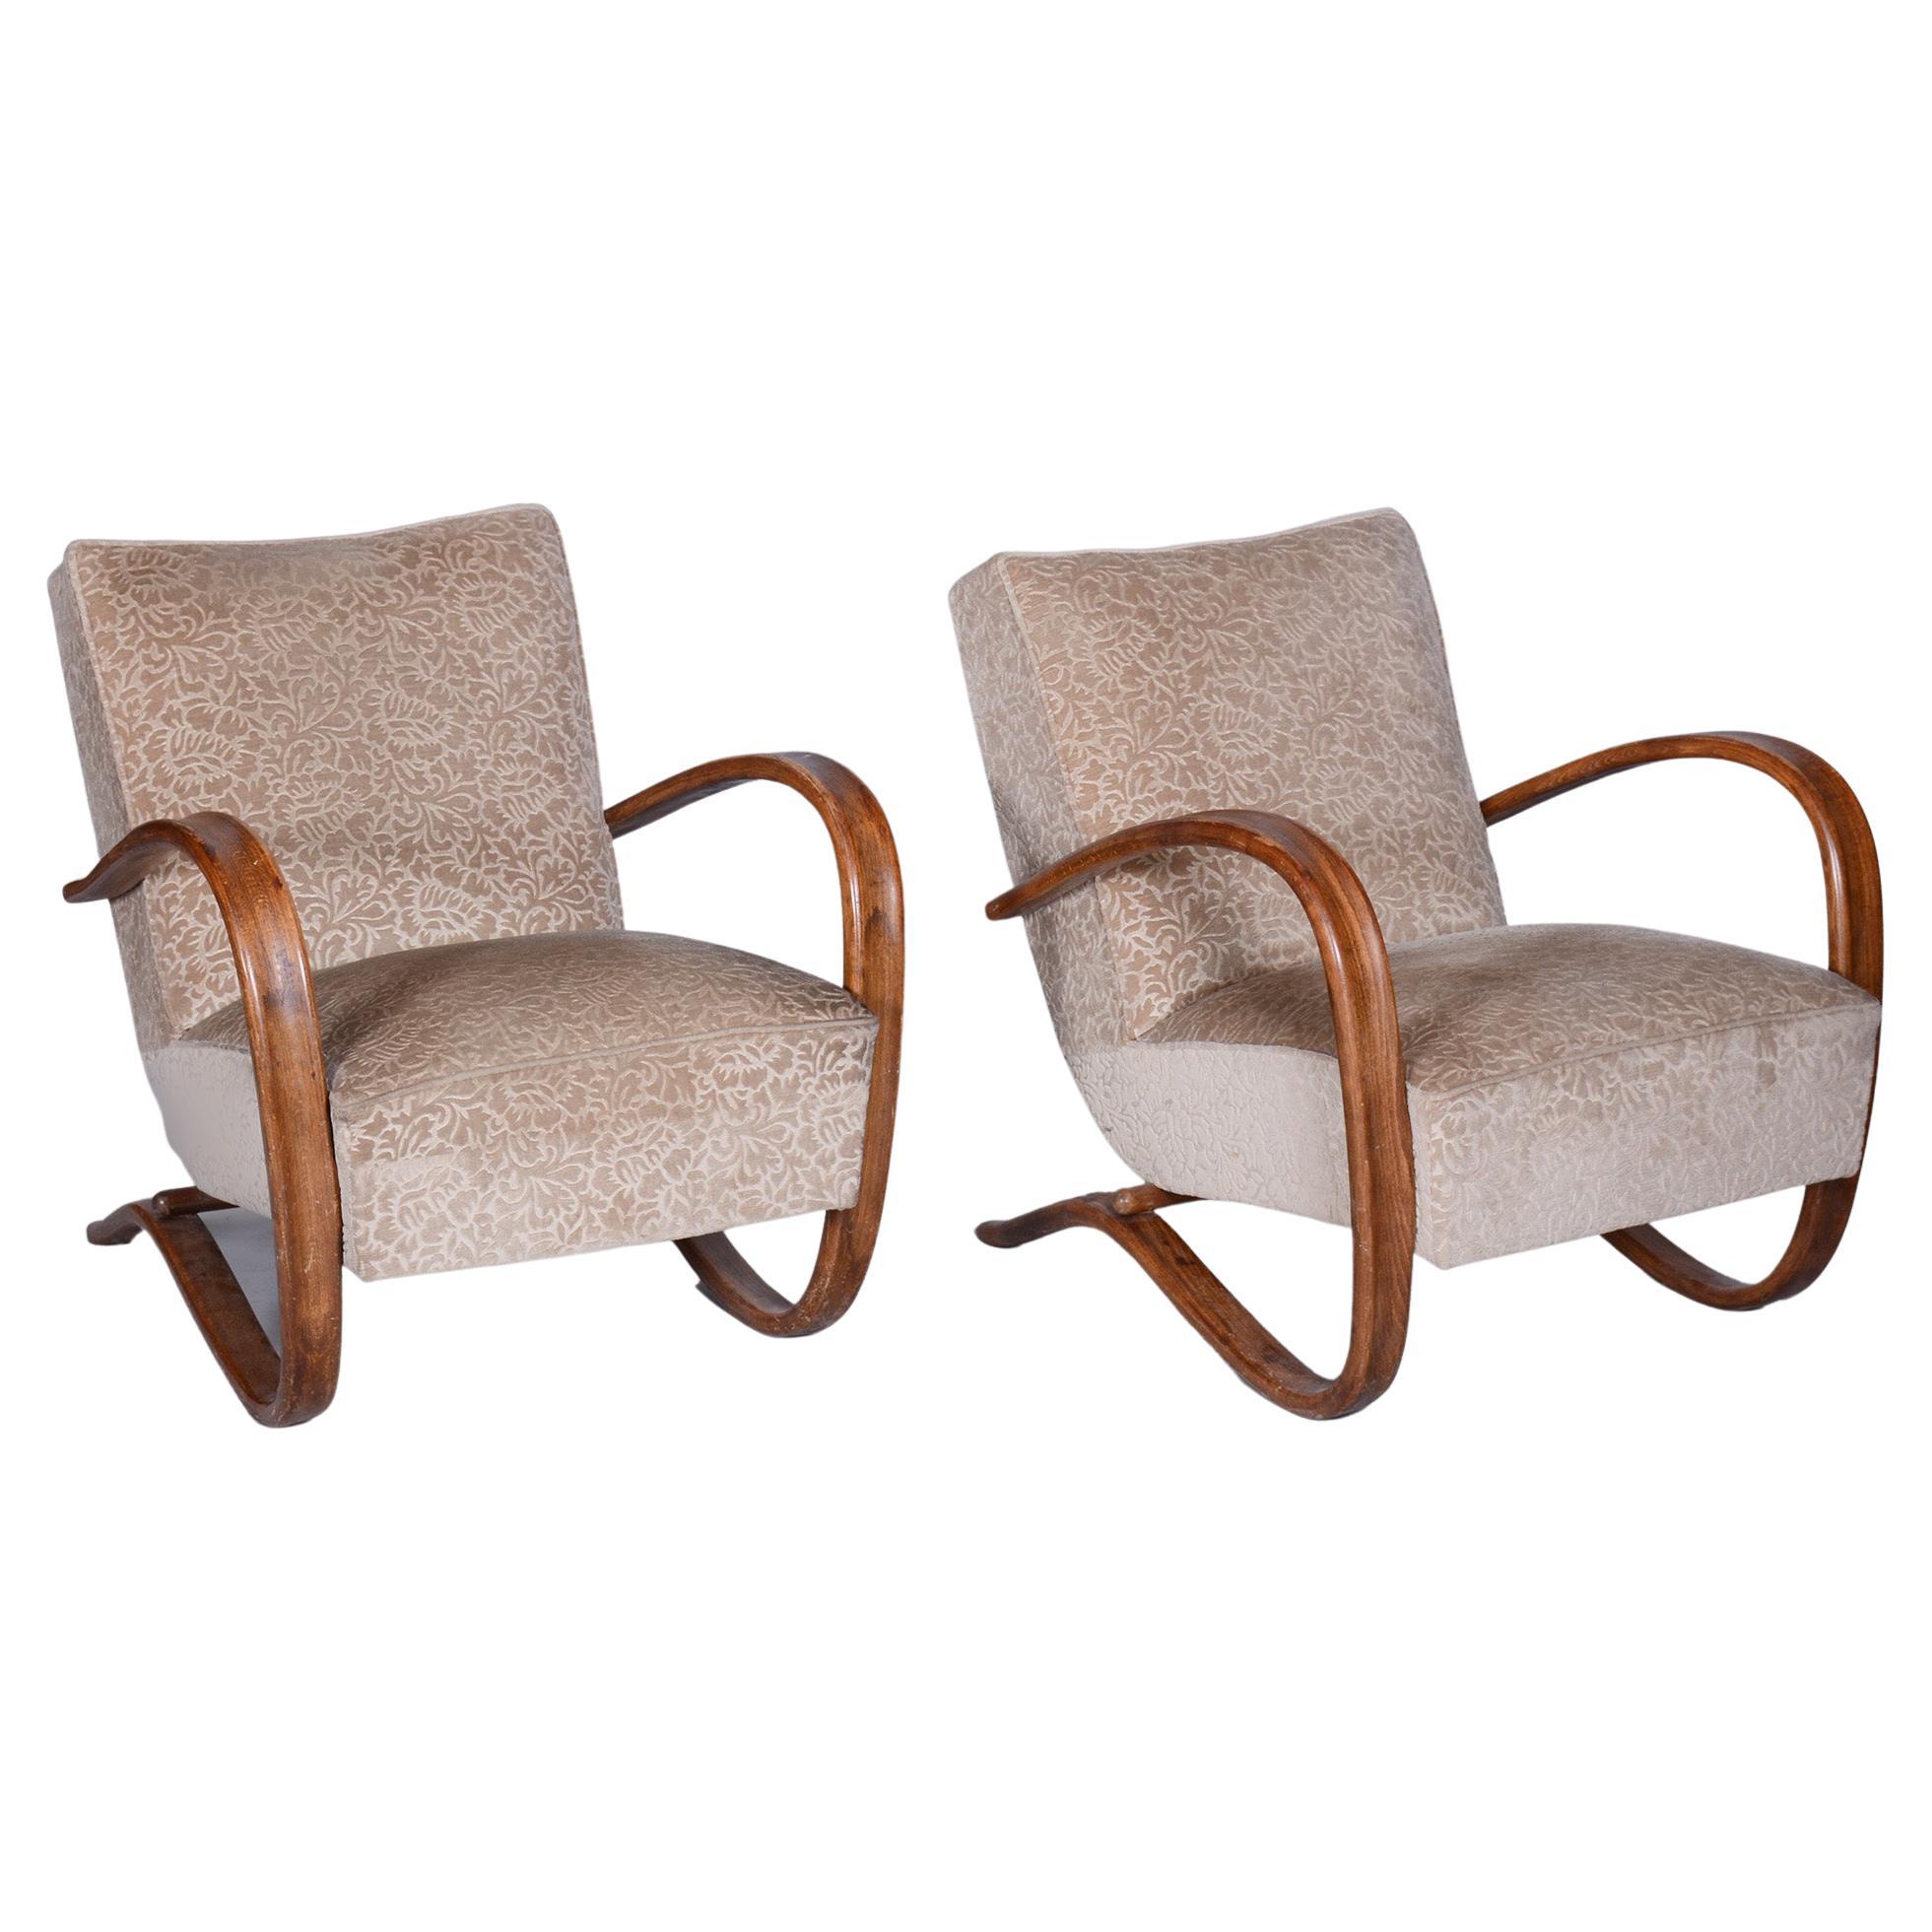 Pair of Beige H-269 Armchairs Designed by Jindrich Halabala for UP Zavody, 1930s